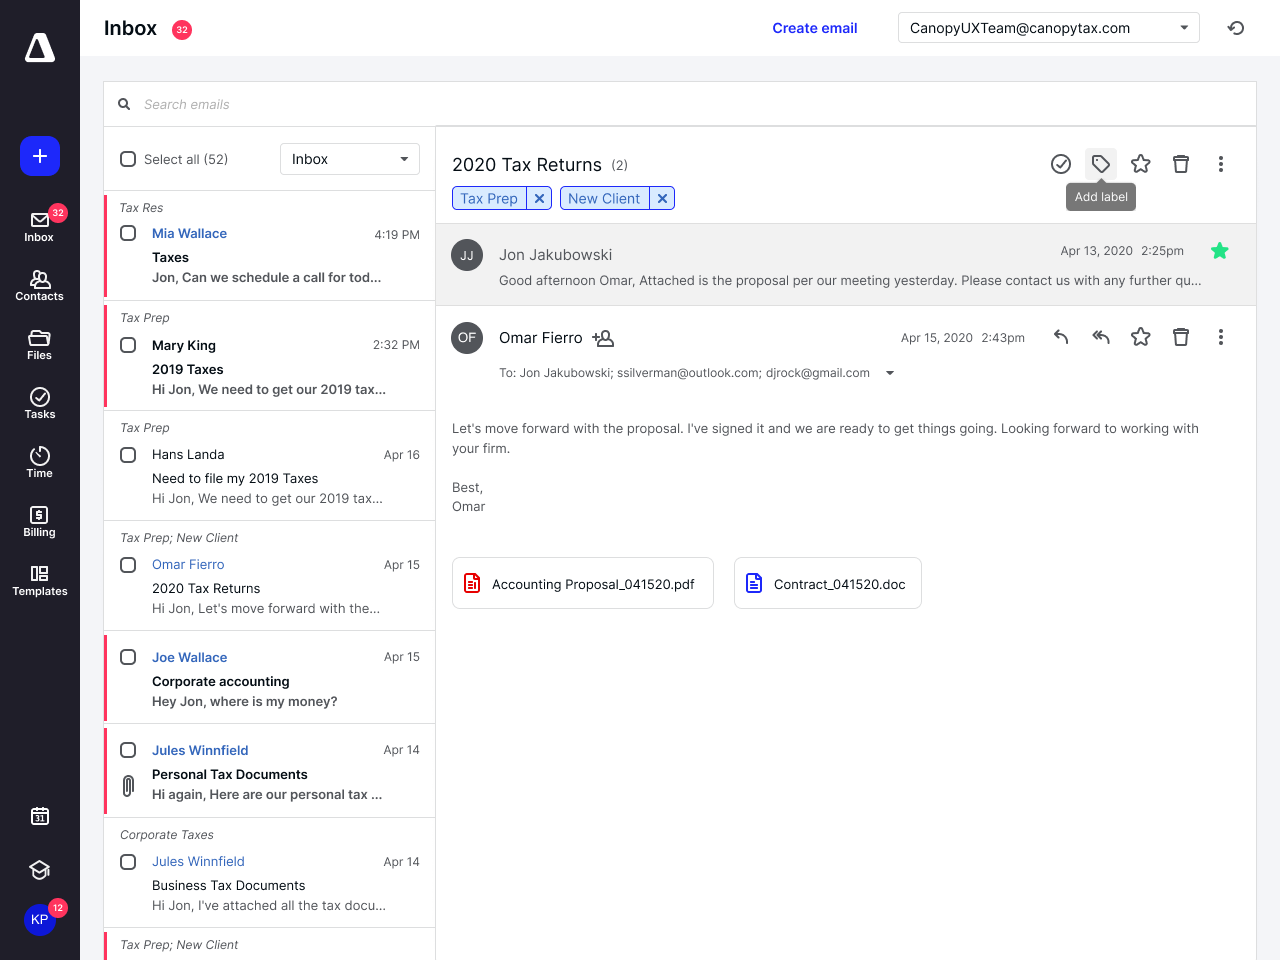 Canopy Releases New Enhancements to Global Inbox